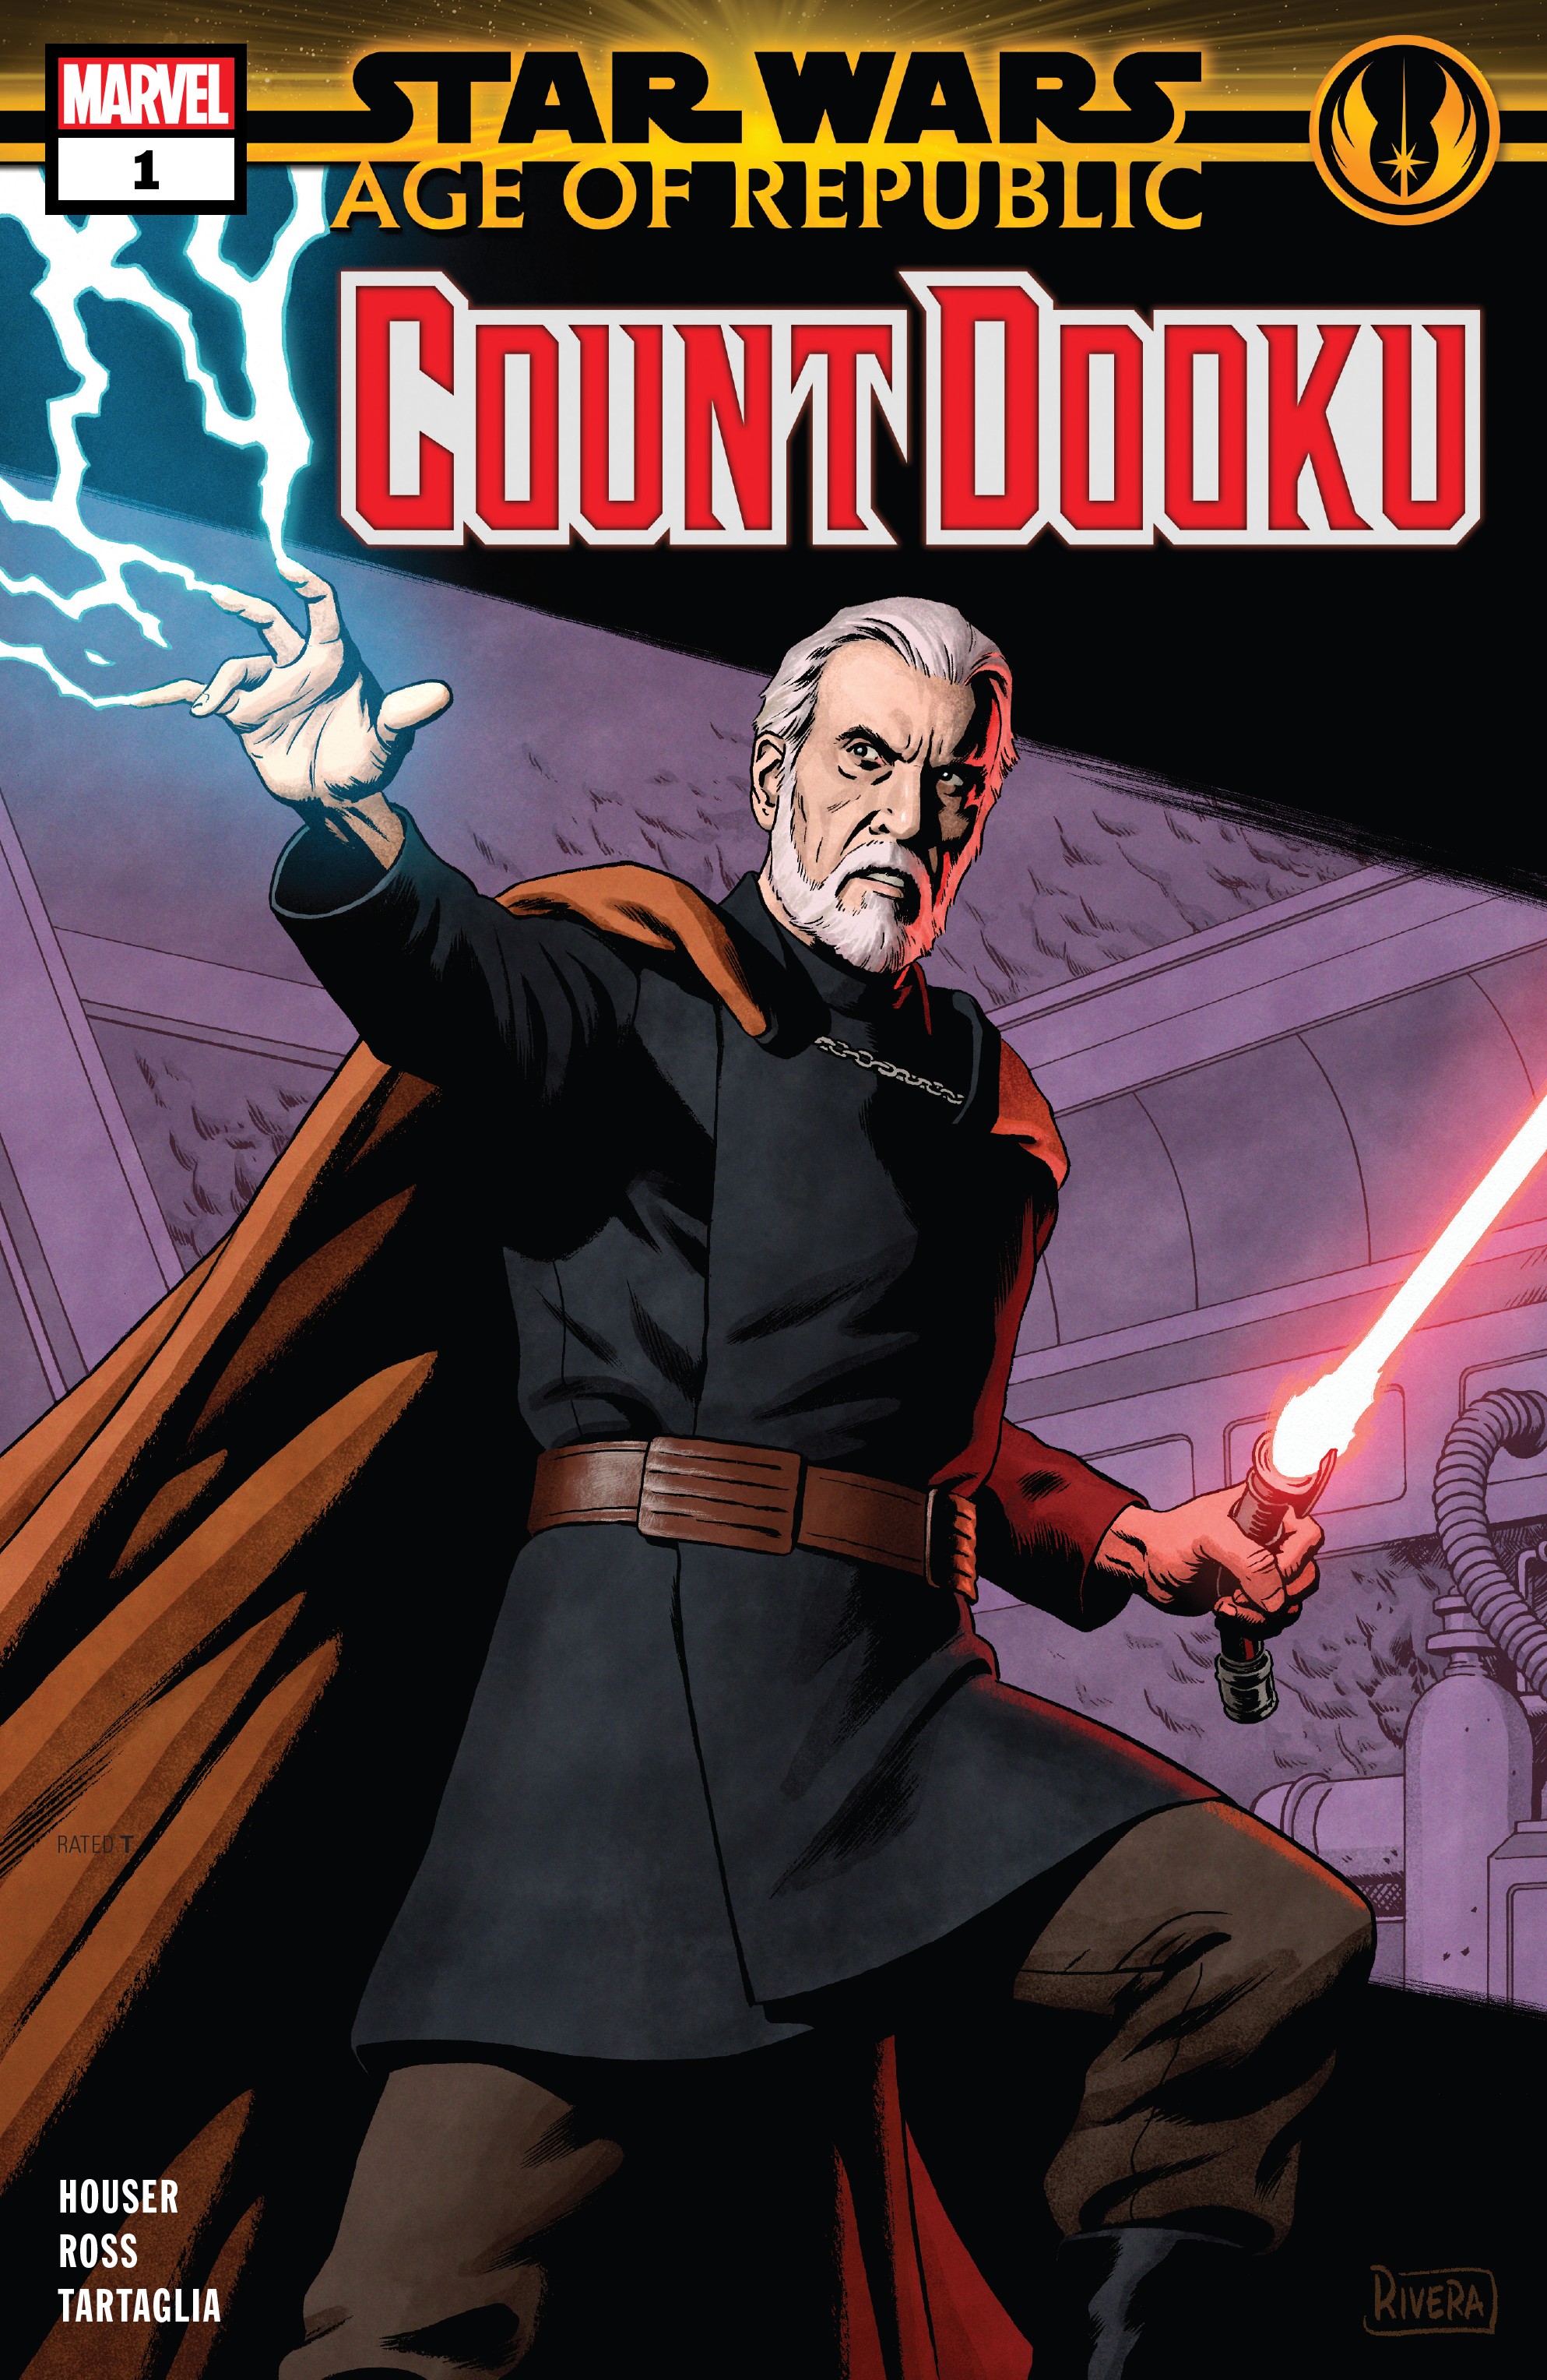 Star Wars Age Of Republic Count Dooku Full | Read Star Wars Age Of Republic Count  Dooku Full comic online in high quality. Read Full Comic online for free -  Read comics